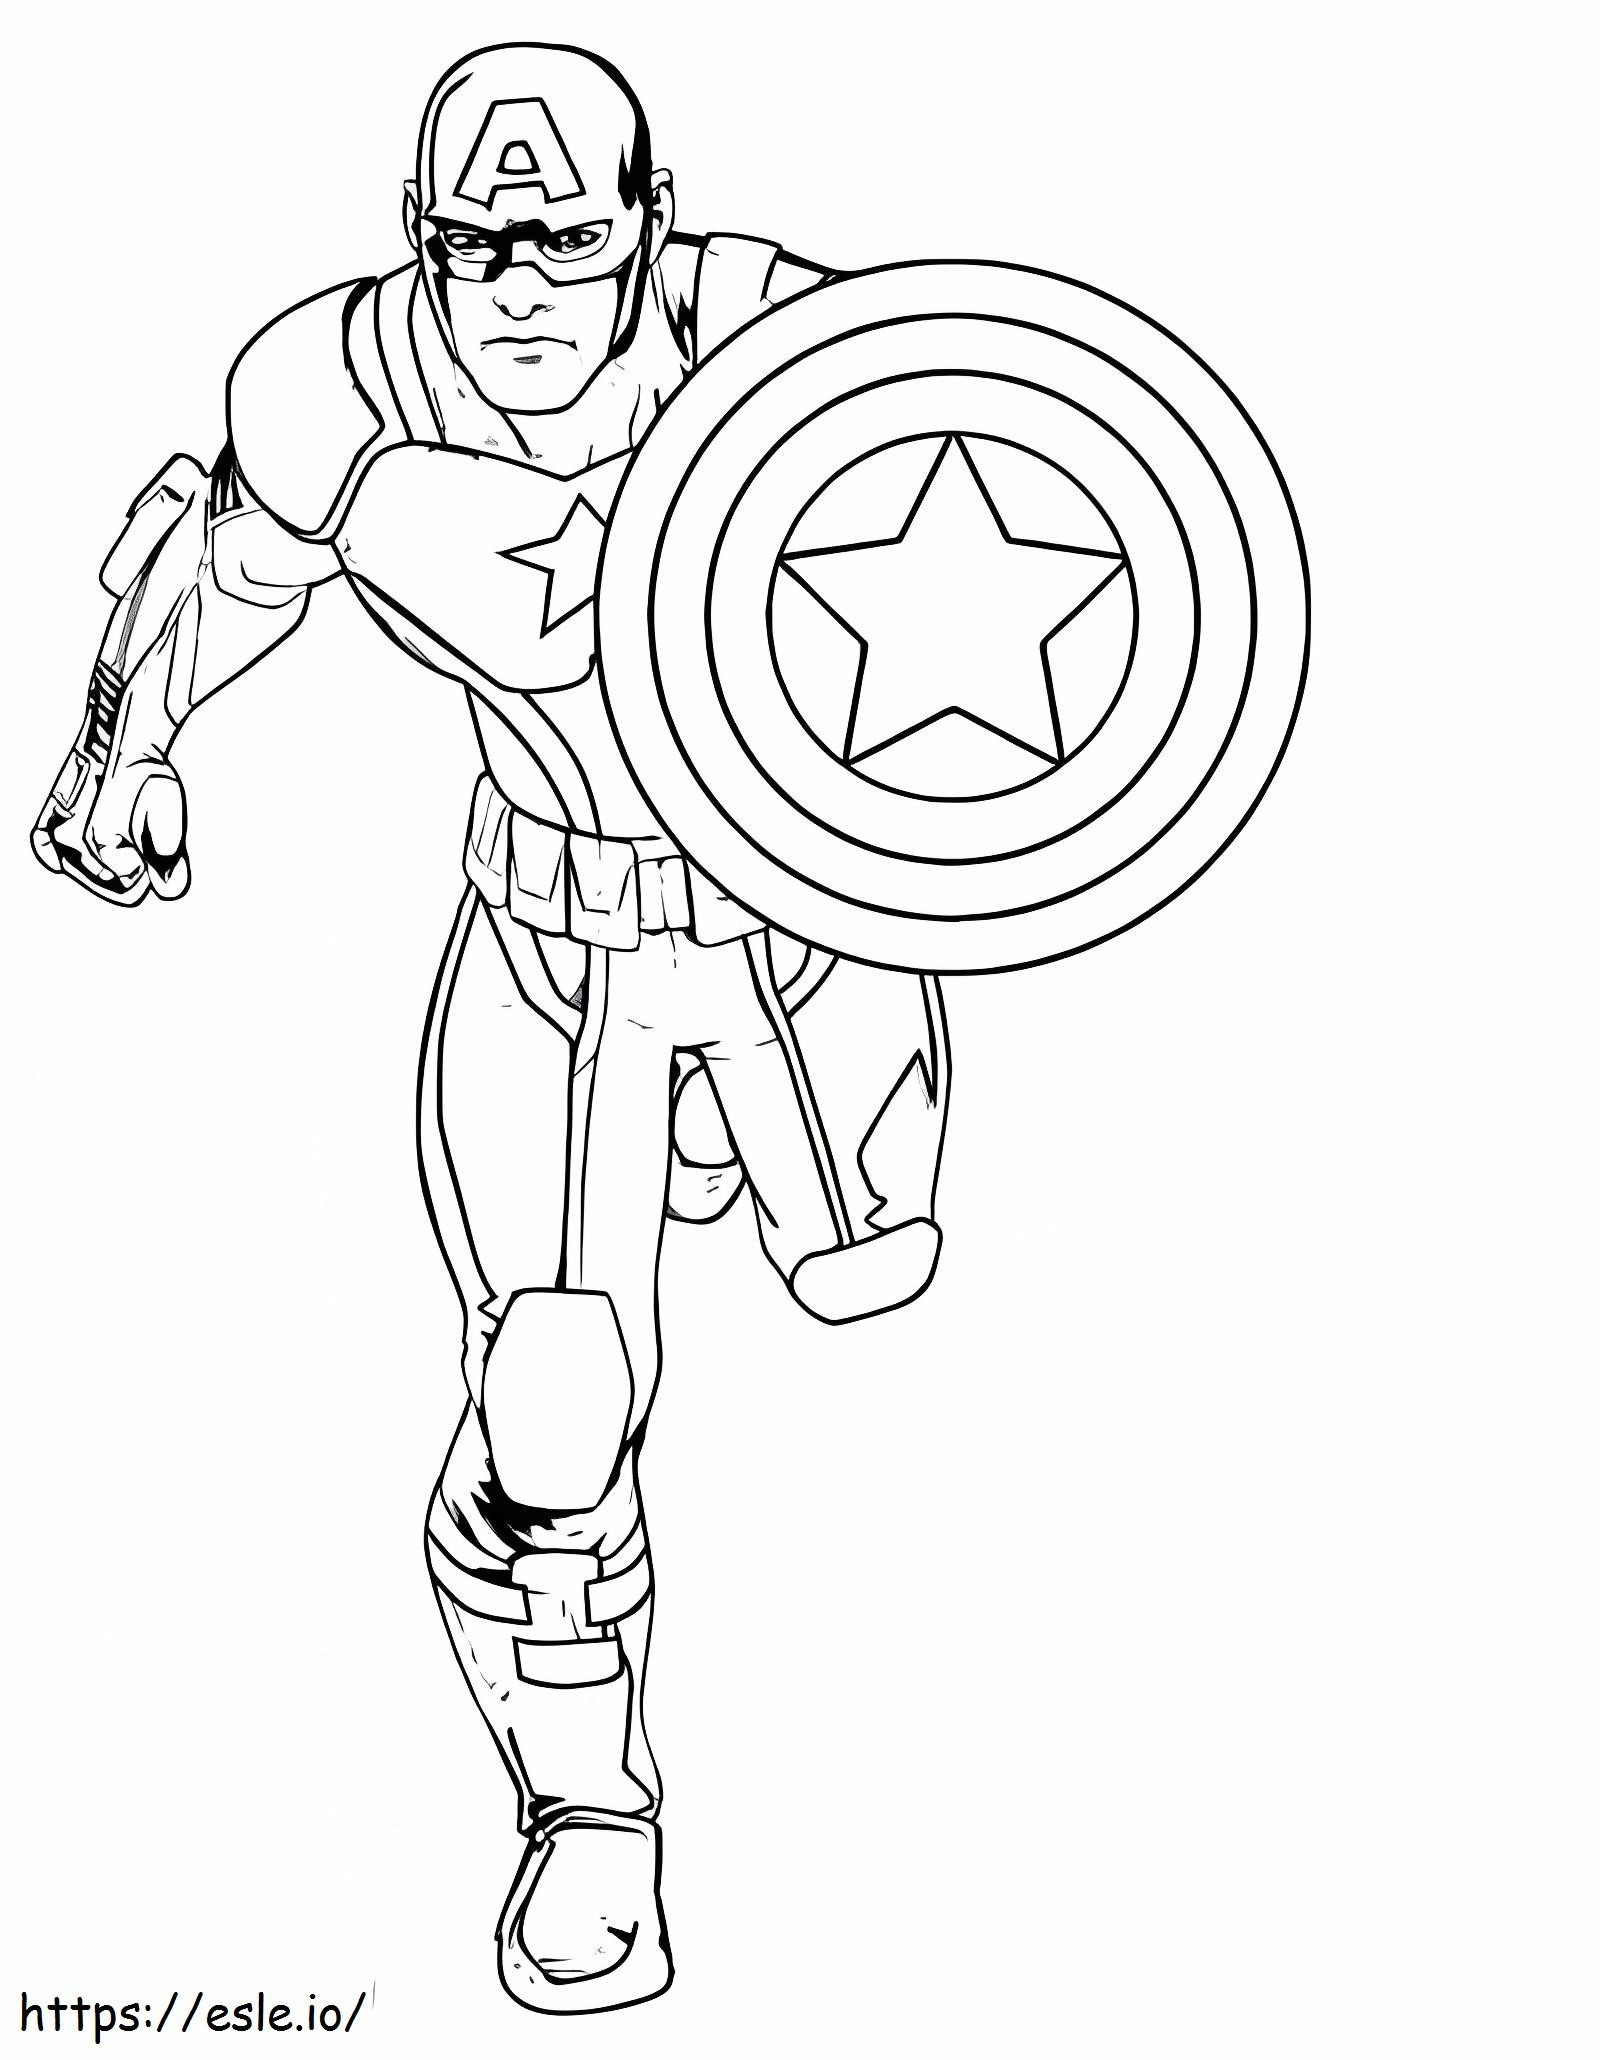 Captain America Running coloring page